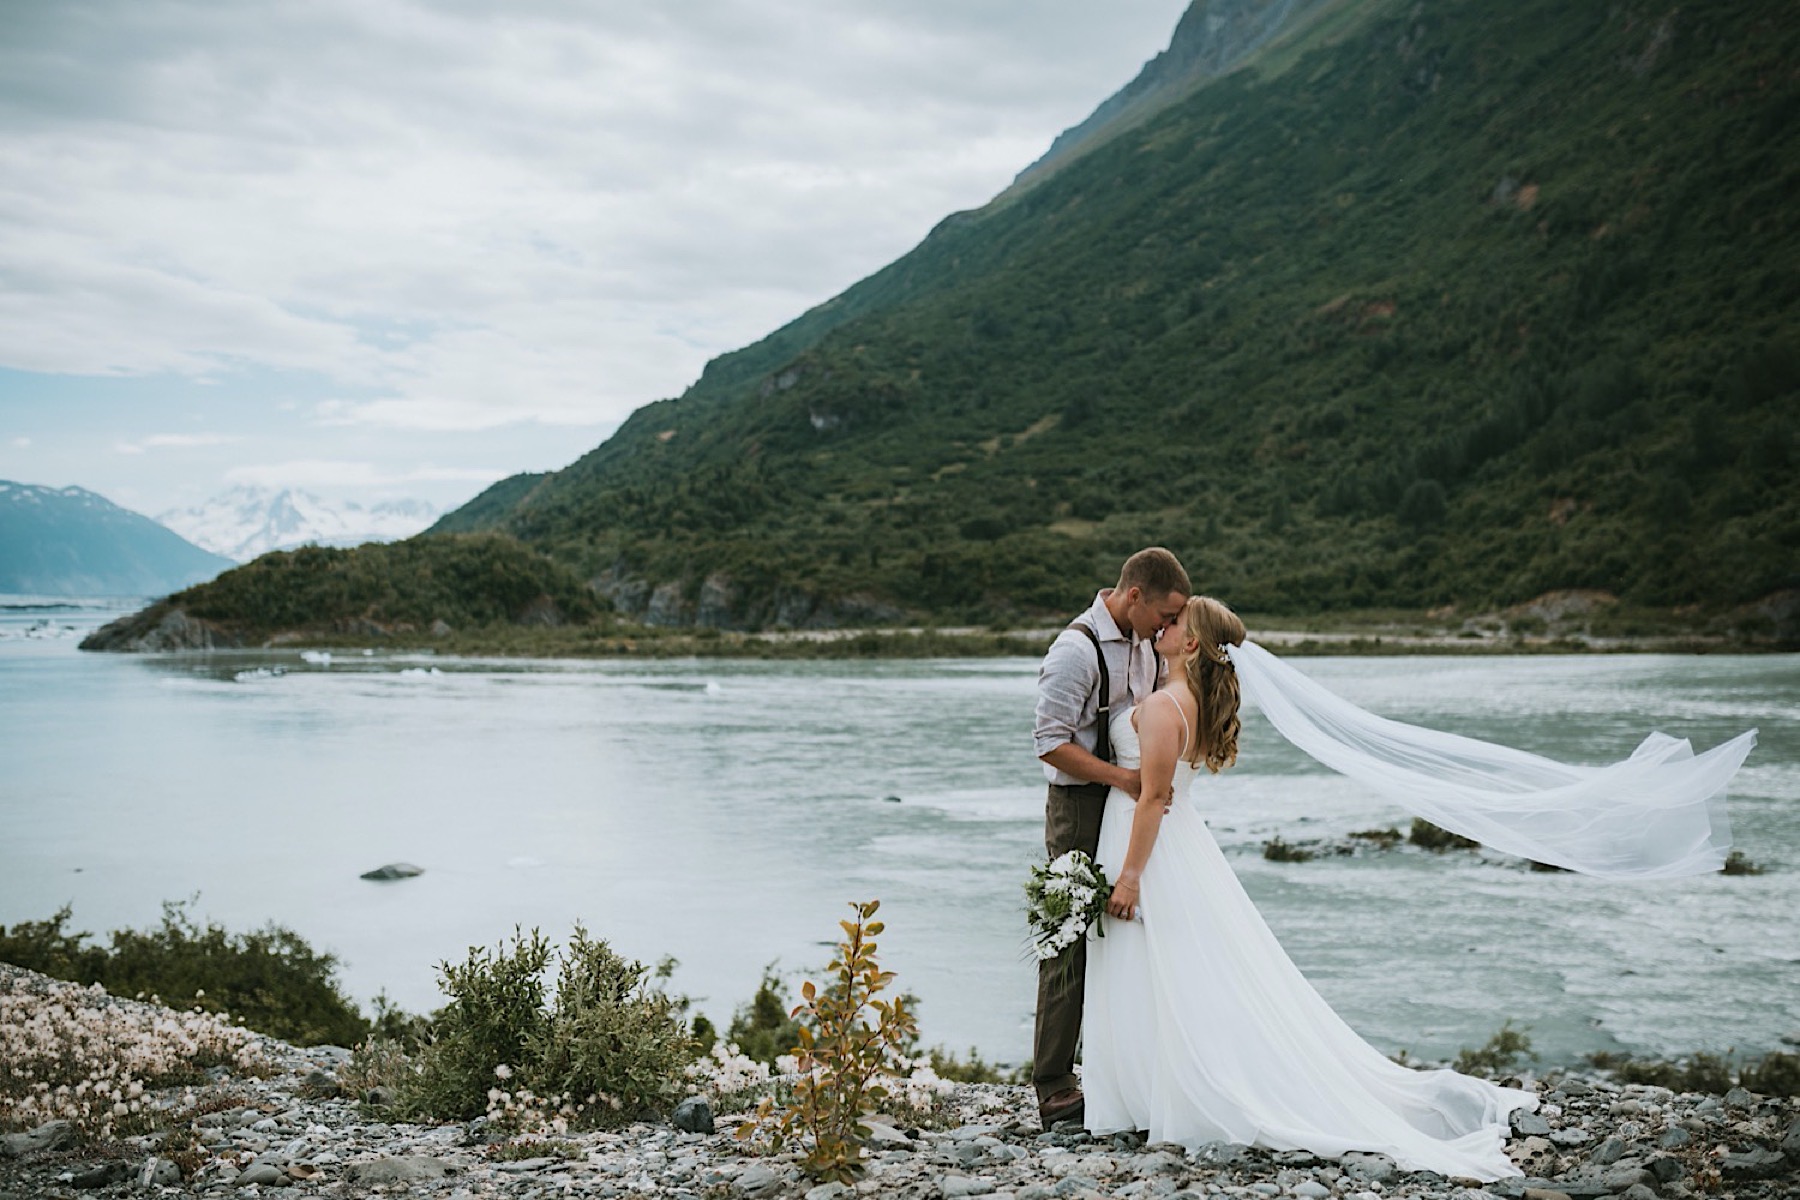 Bride and groom kissing in front of Knik River as her veil blows in the wind